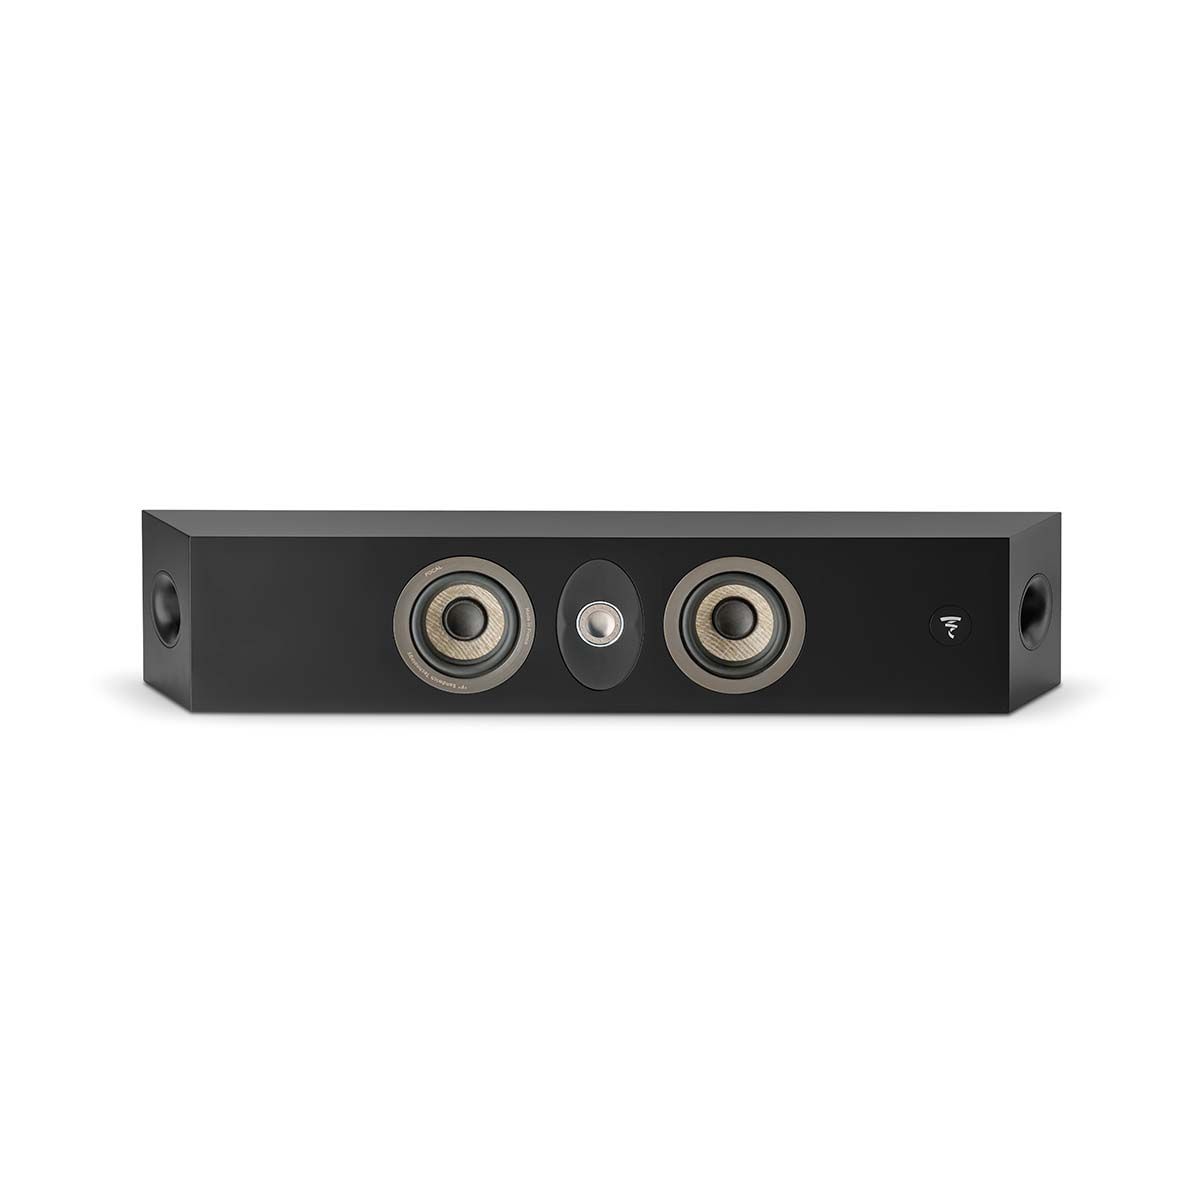 Focal On Wall 301 Speaker, Satin Black, horizontal front view without grille